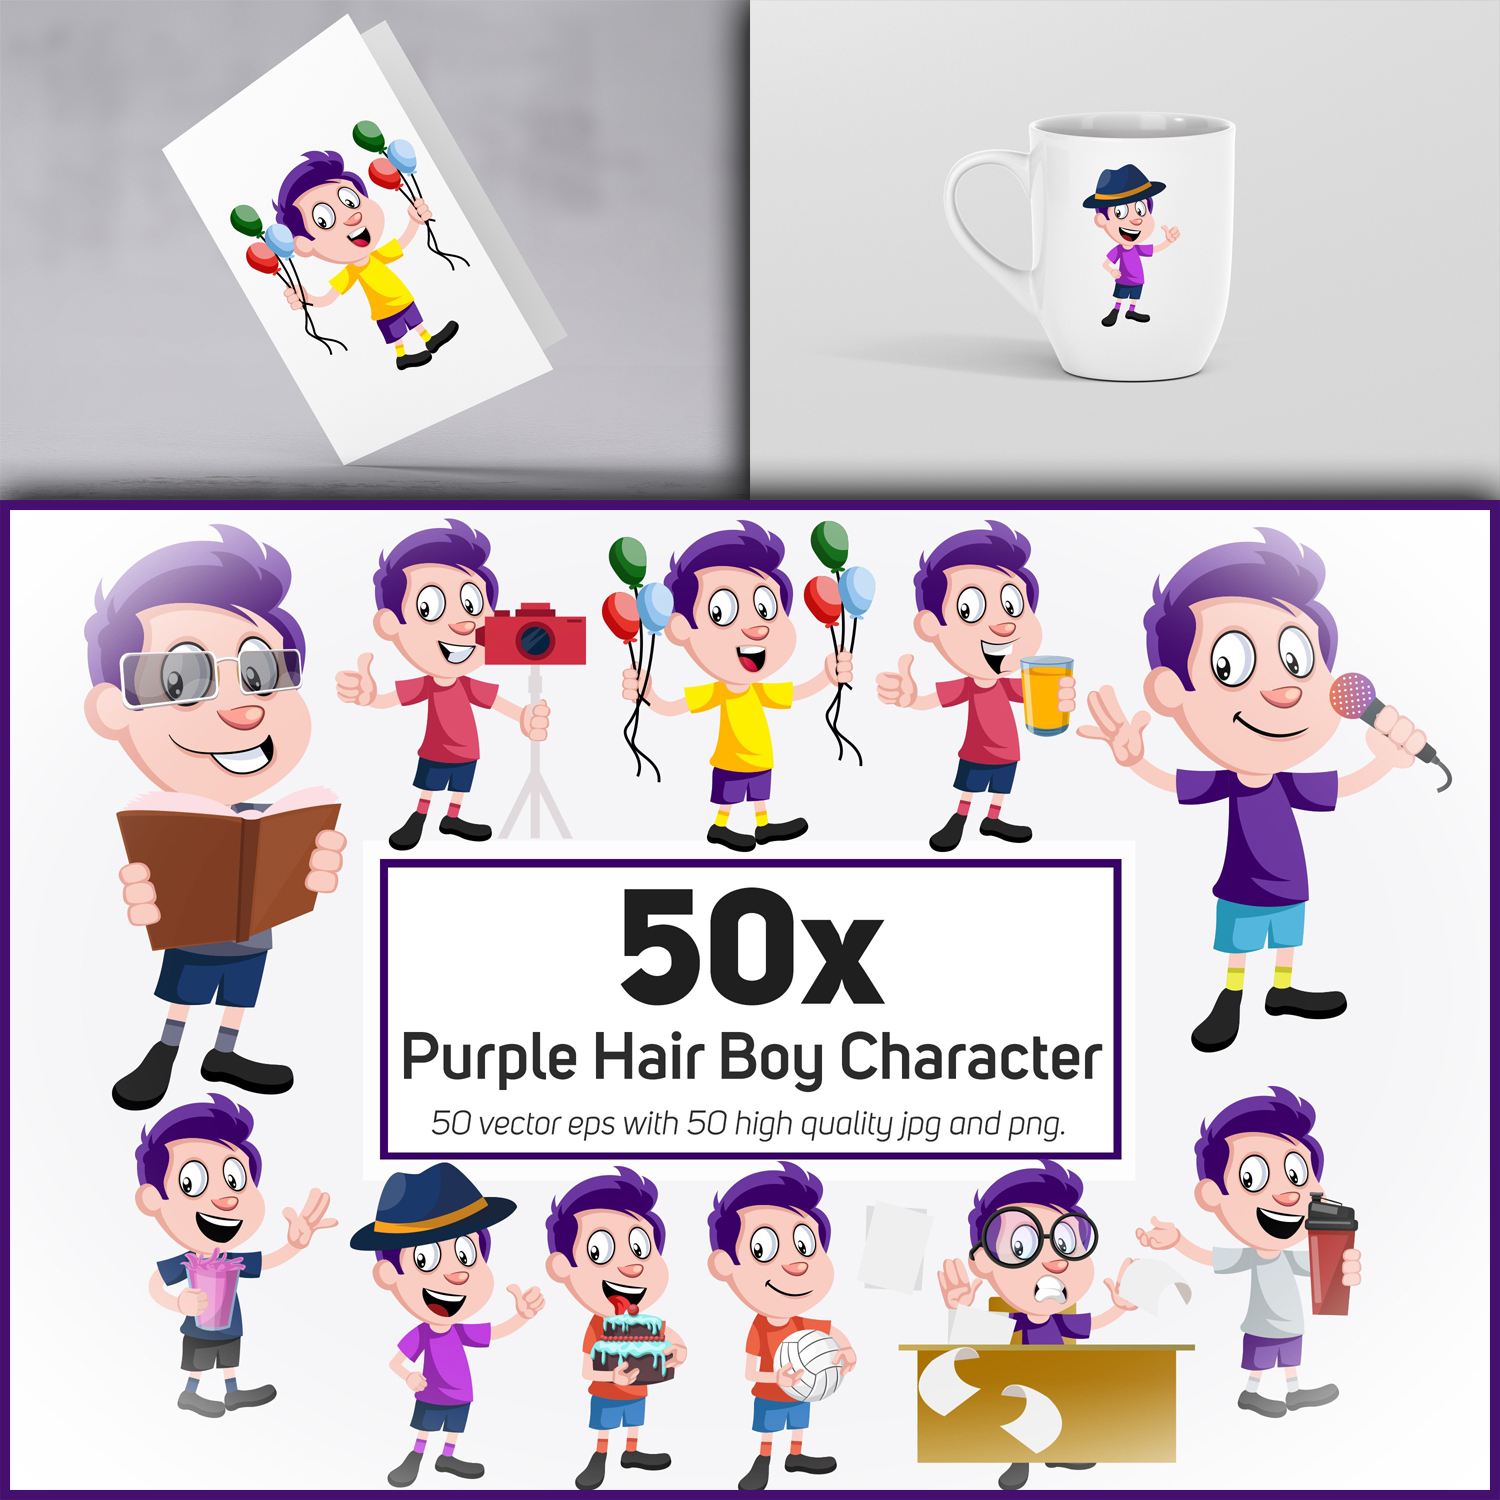 50x Purple Hair Boy Character and Daily Life action cover.